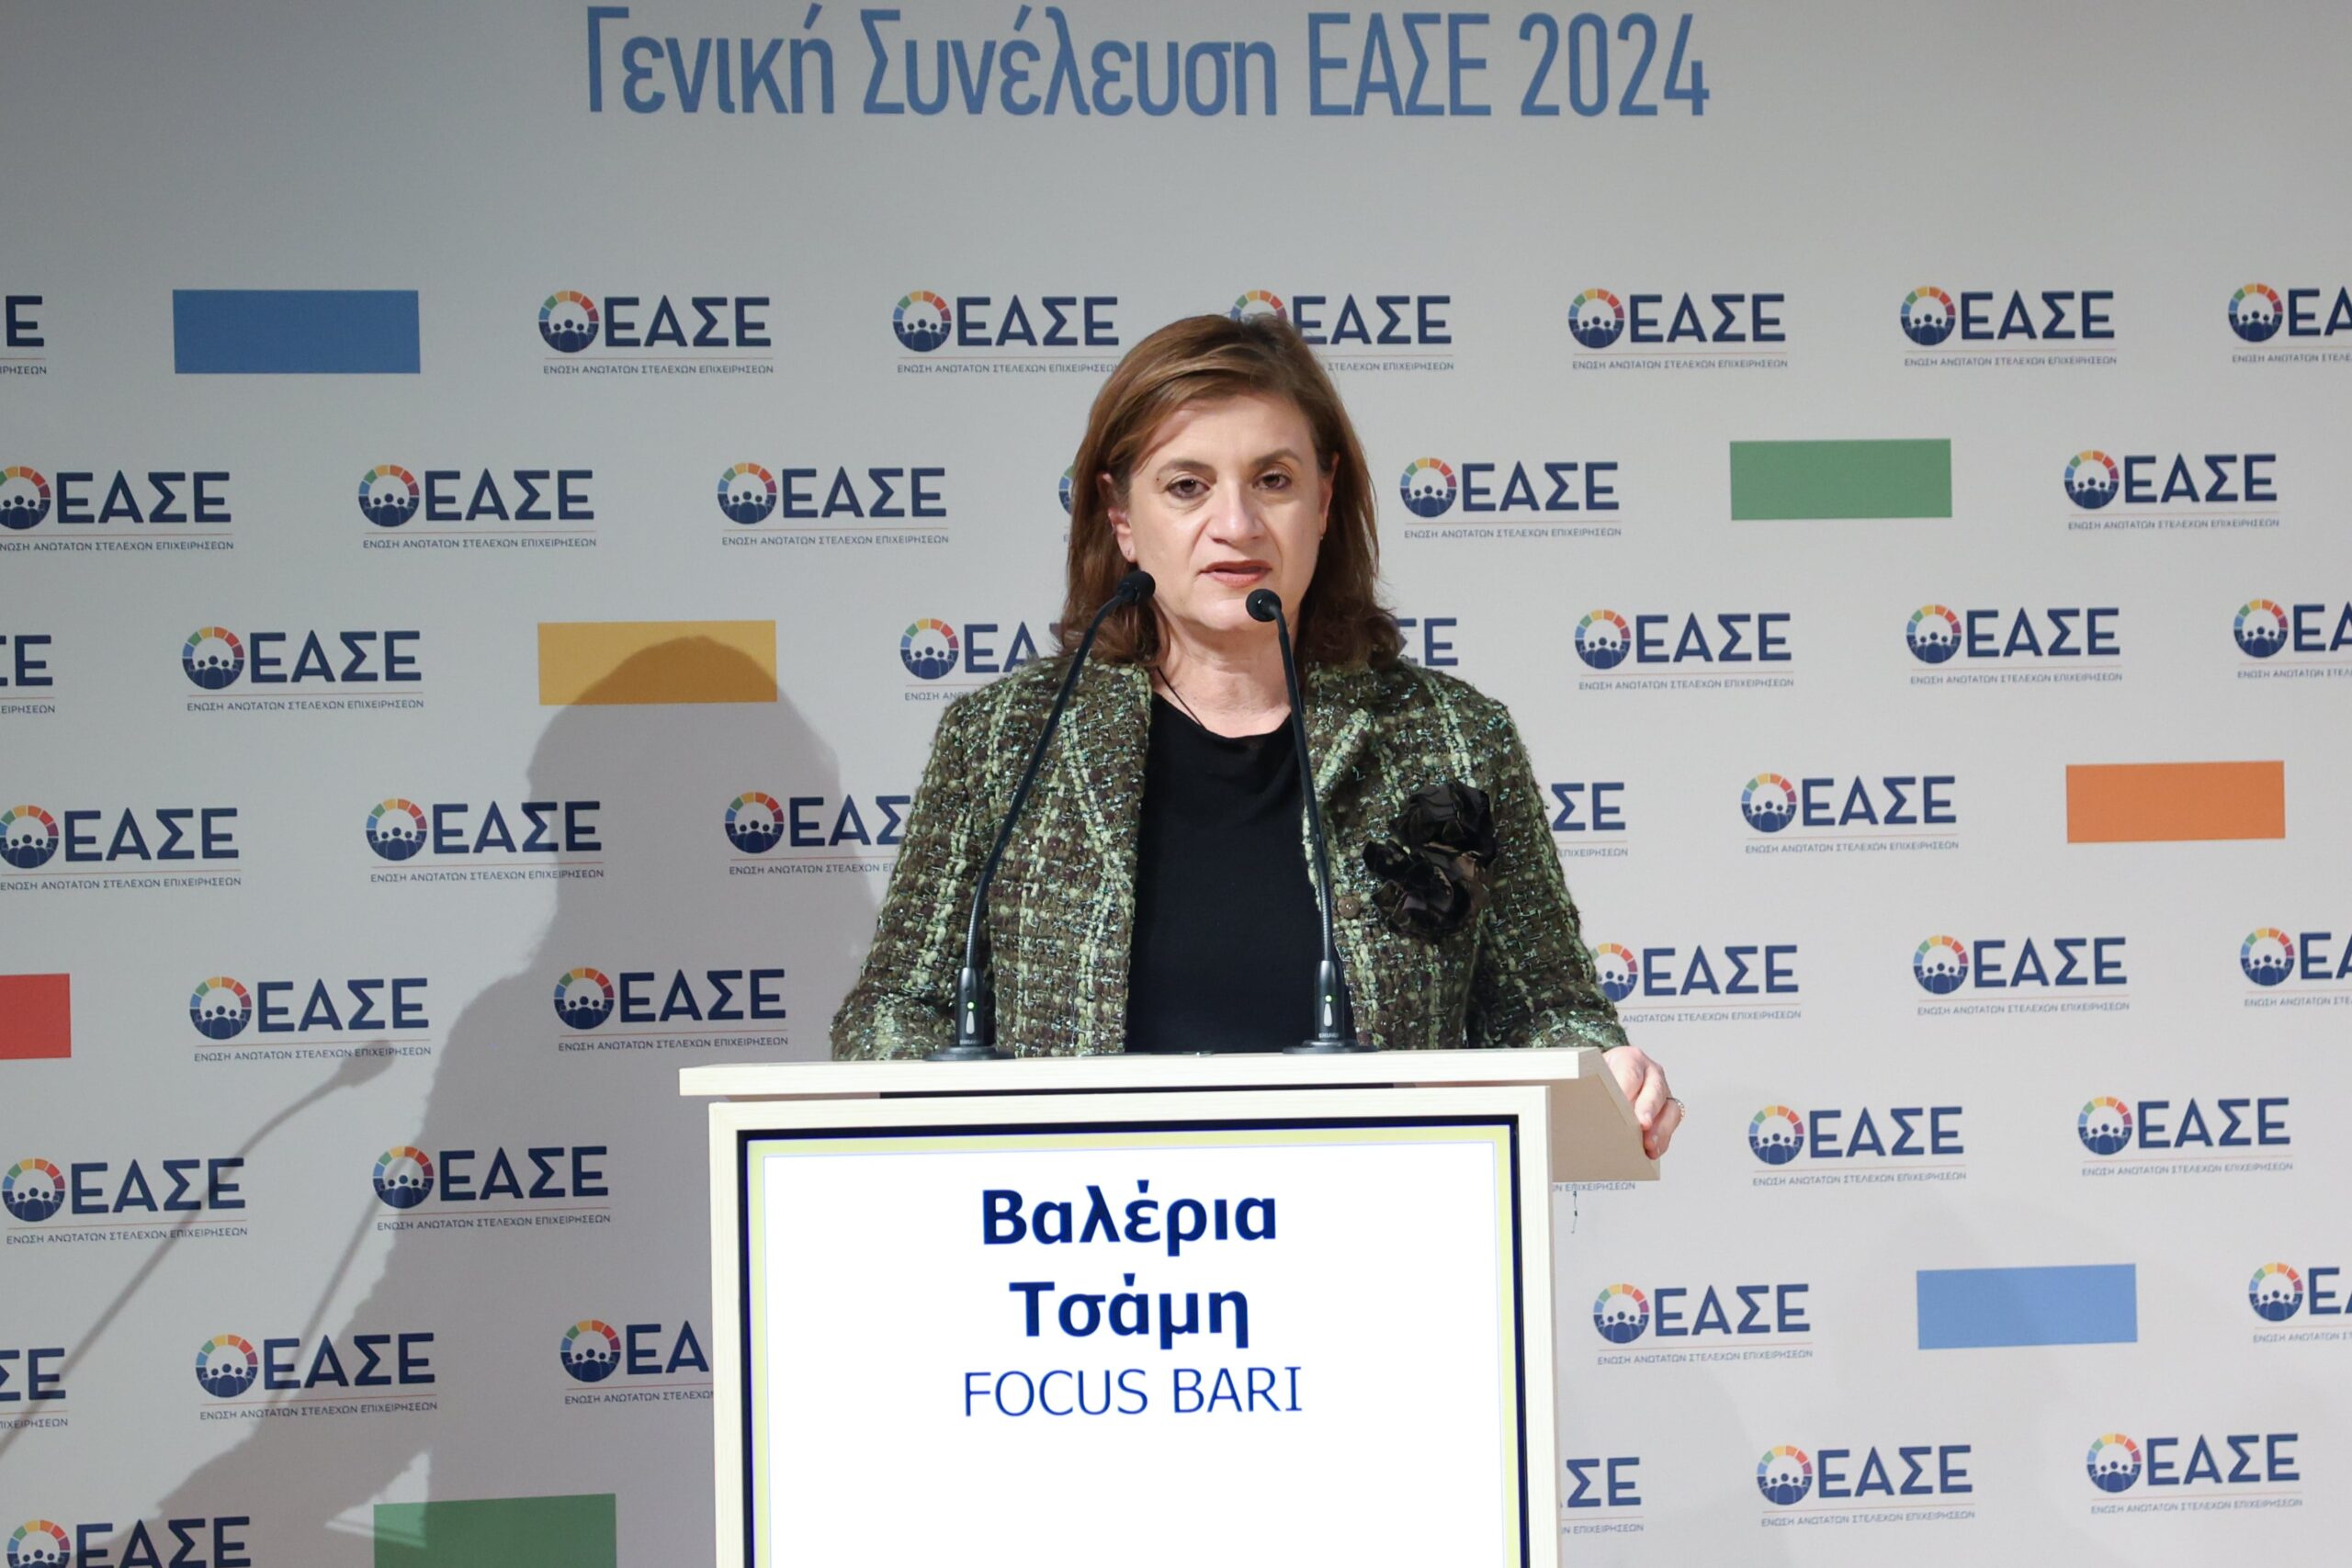 Valeria Tsamis of Focus Bari, General Secretary BoD of the Association of Chief Executive Officers (ACEO/EASE)